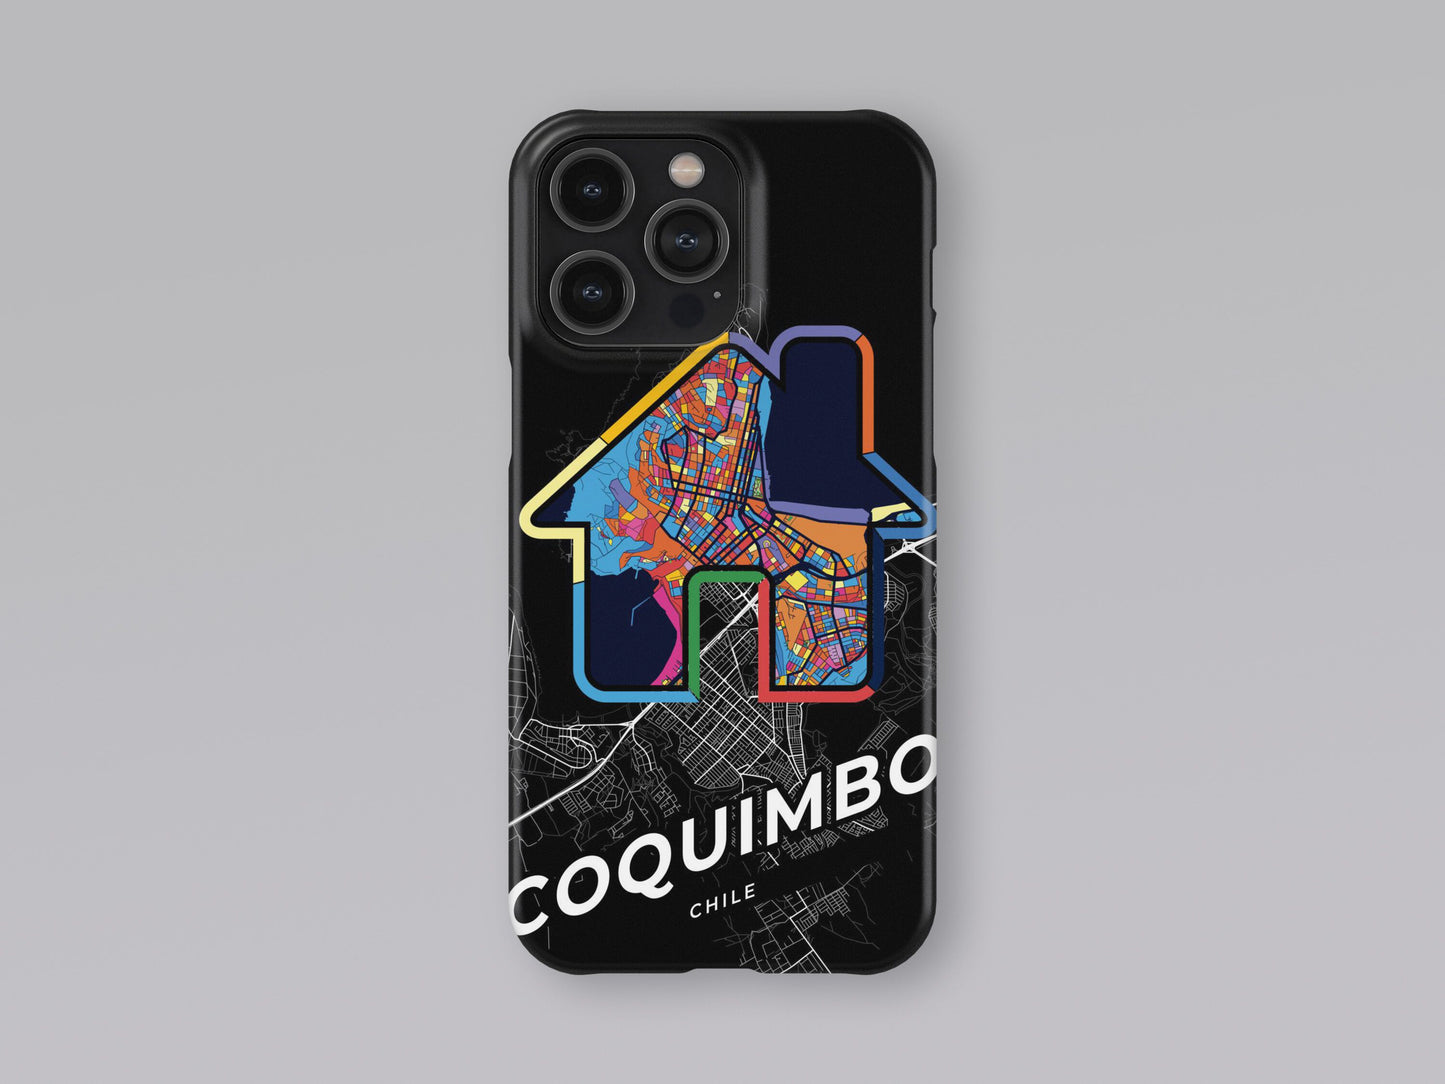 Coquimbo Chile slim phone case with colorful icon. Birthday, wedding or housewarming gift. Couple match cases. 3